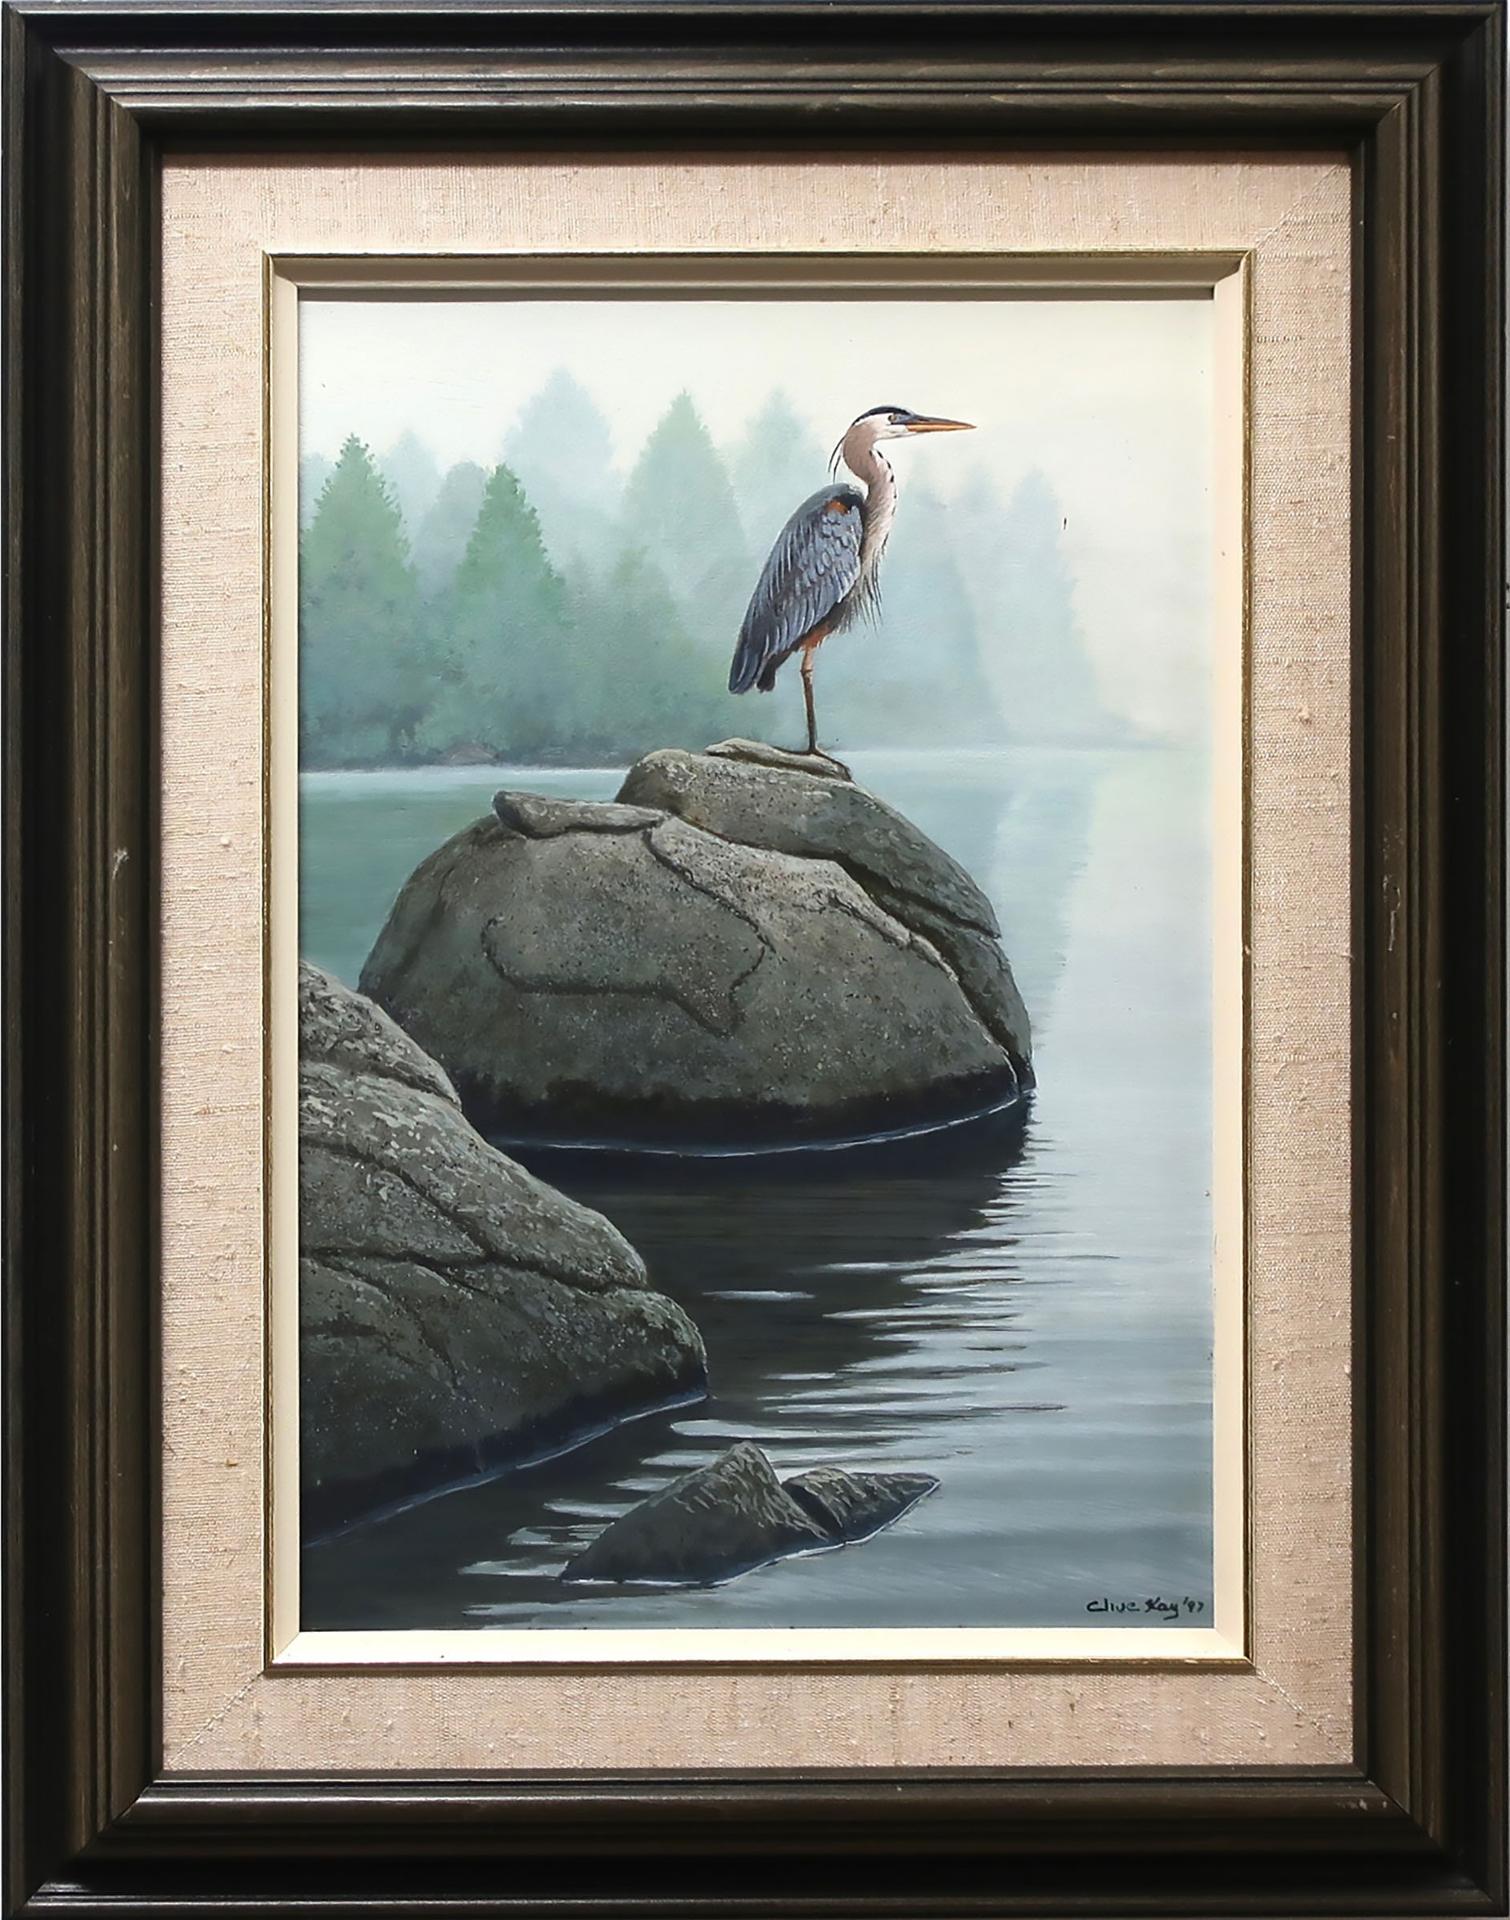 Clive Kay - The Great Blue Heron